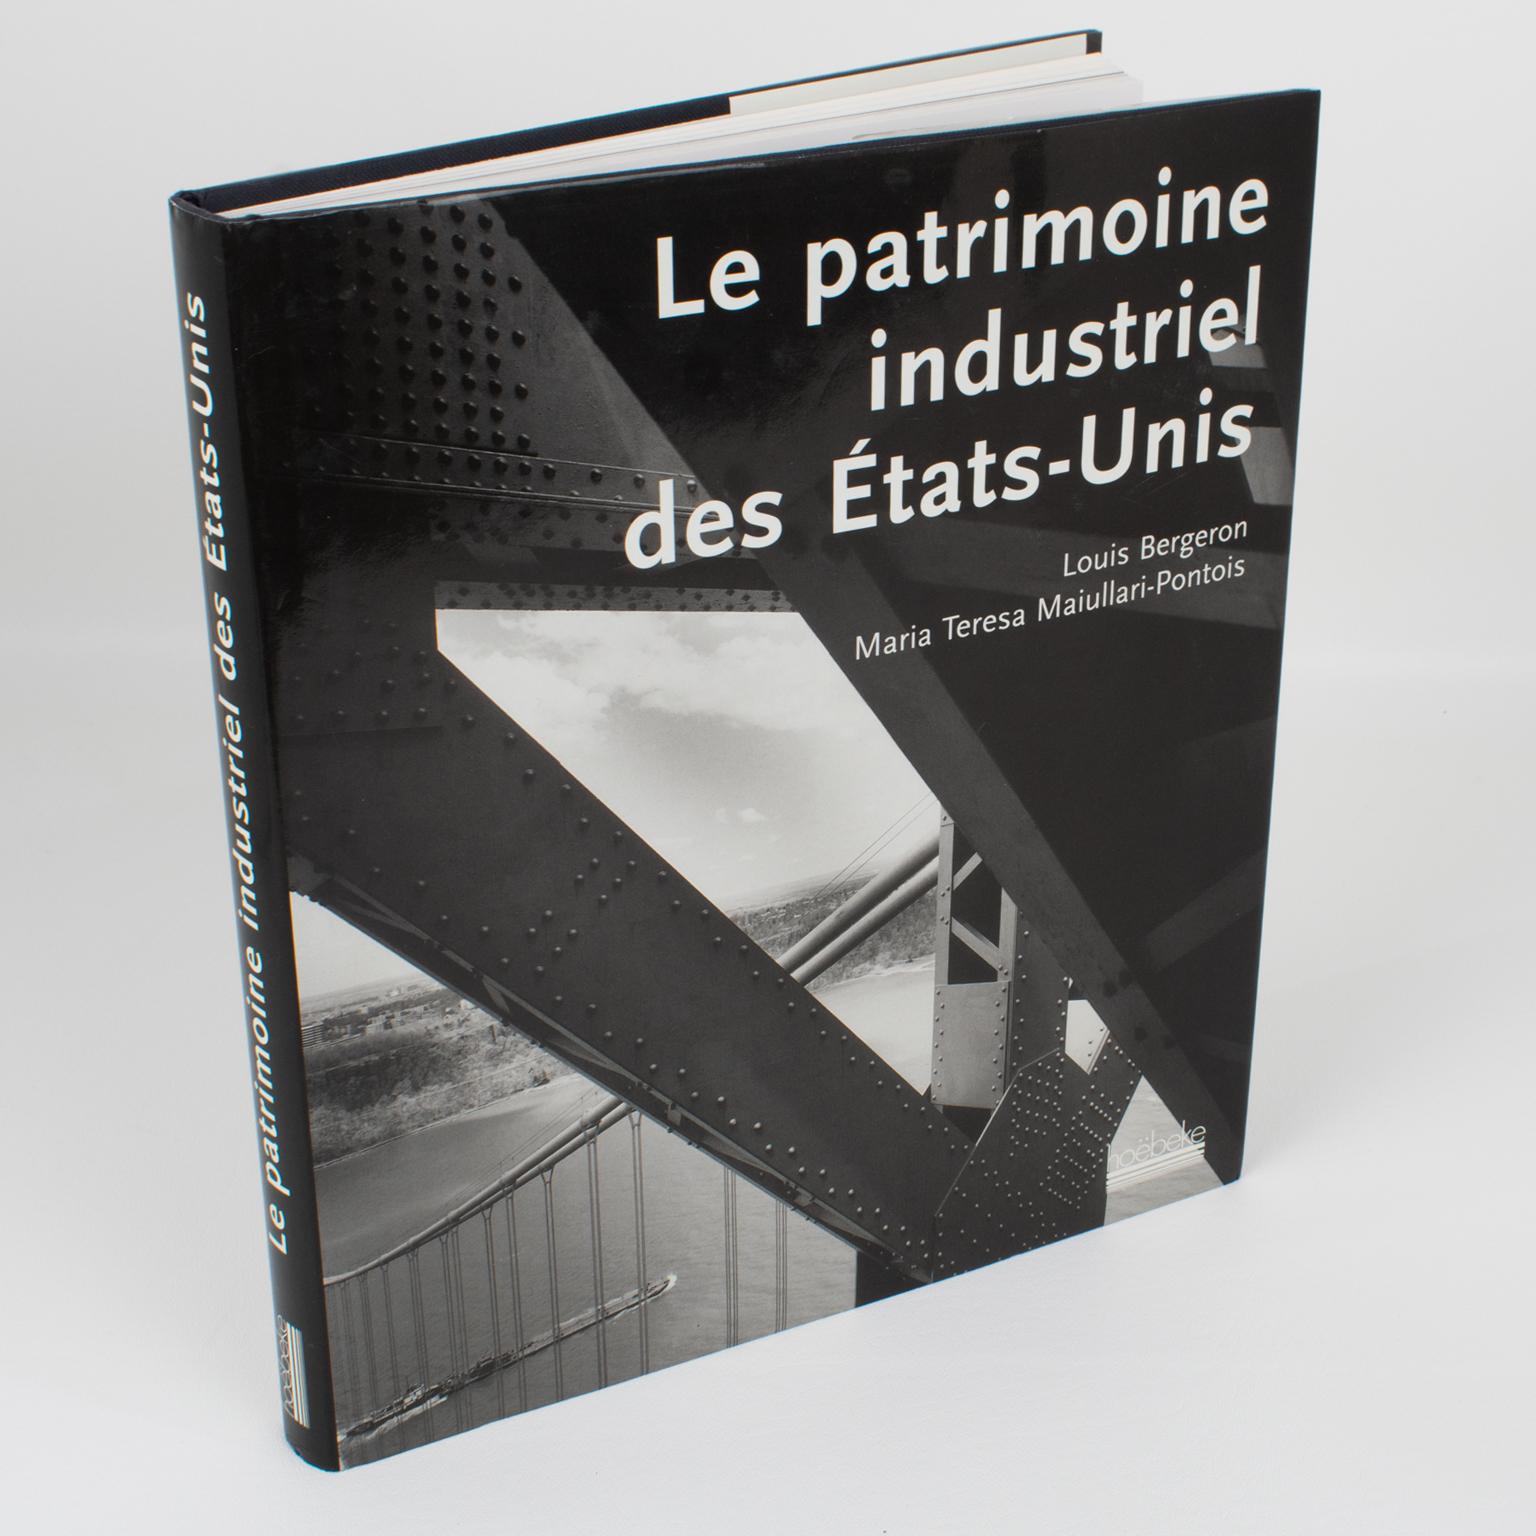 Le Patrimoine Industriel des Etats-Unis (The Industrial Heritage of The United-States), French book by Louis Bergeron and Maria Teresa Maiullari-Pontois, 2000.
Since the creation of the United States more than two centuries ago, the American dream,